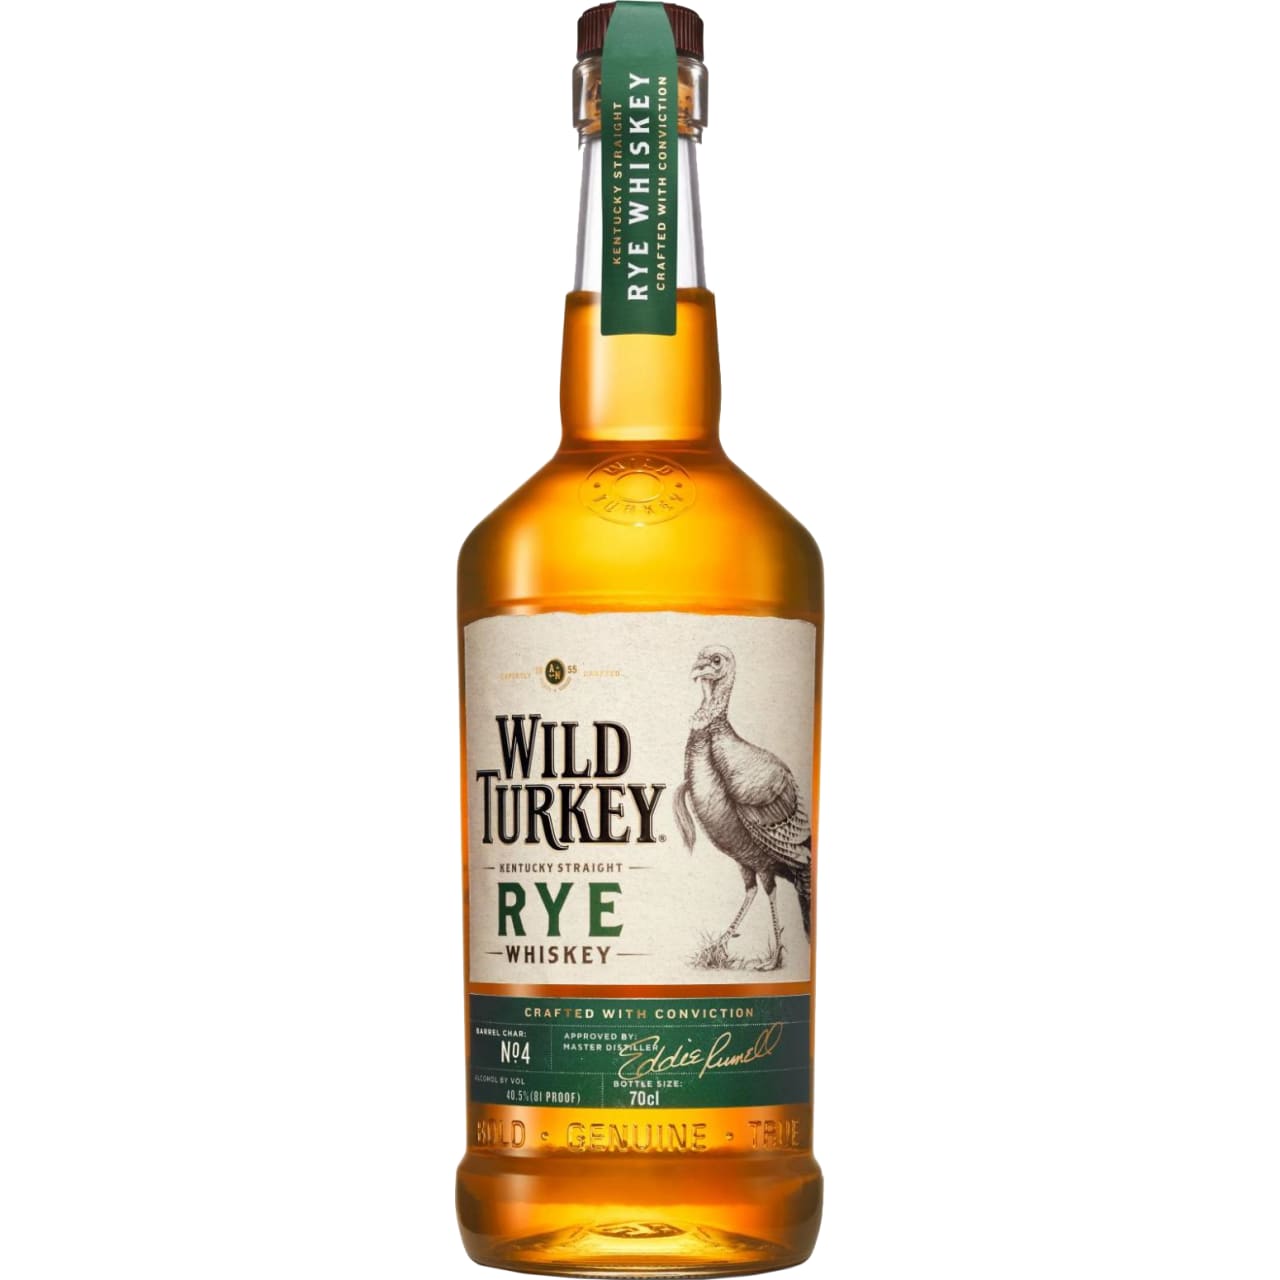 Following Wild Turkey's tried-and-true process, it's aged in American white oak barrels that are coated in the deepest char. The bold rye flavour is underscored by notes of sweetness and spice - a powerful combination.